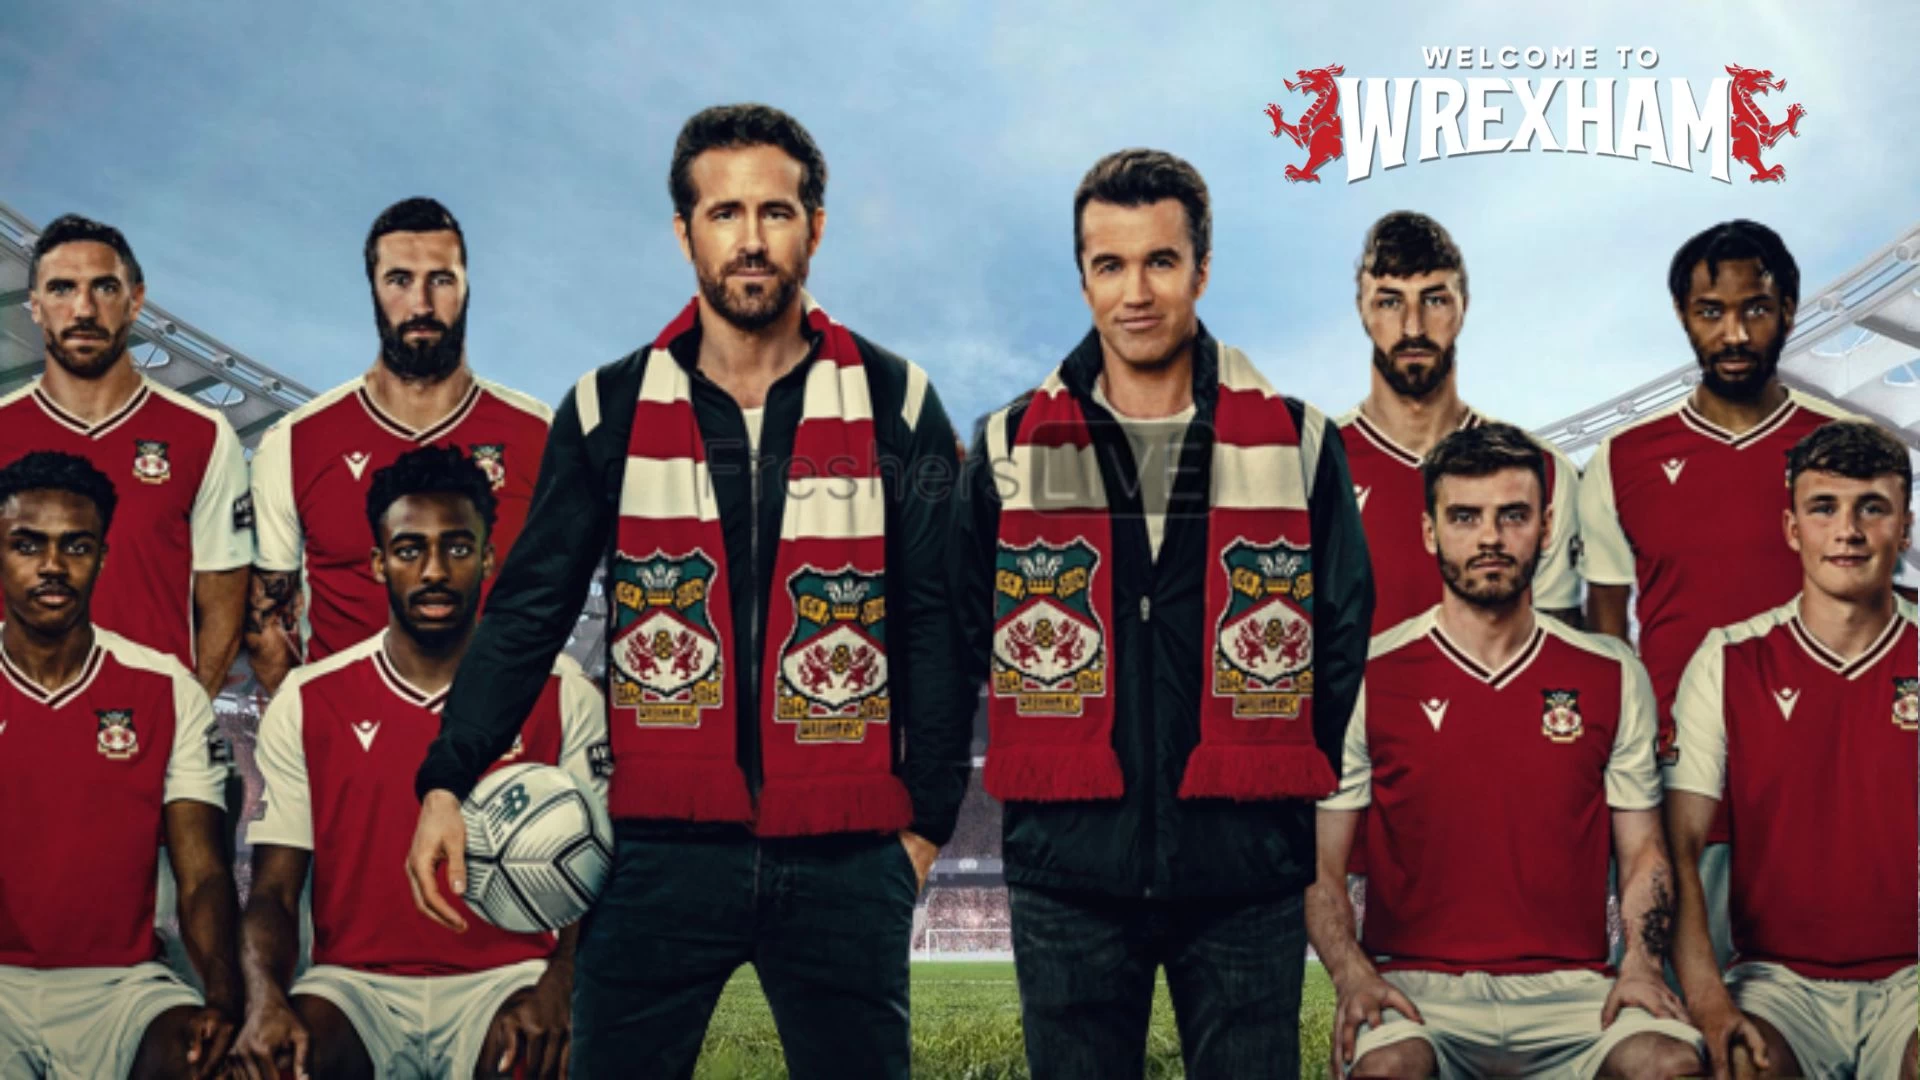 Why is Welcome to Wrexham Season 2 Not on Disney Plus? Where to Watch Welcome to Wrexham Season 2?